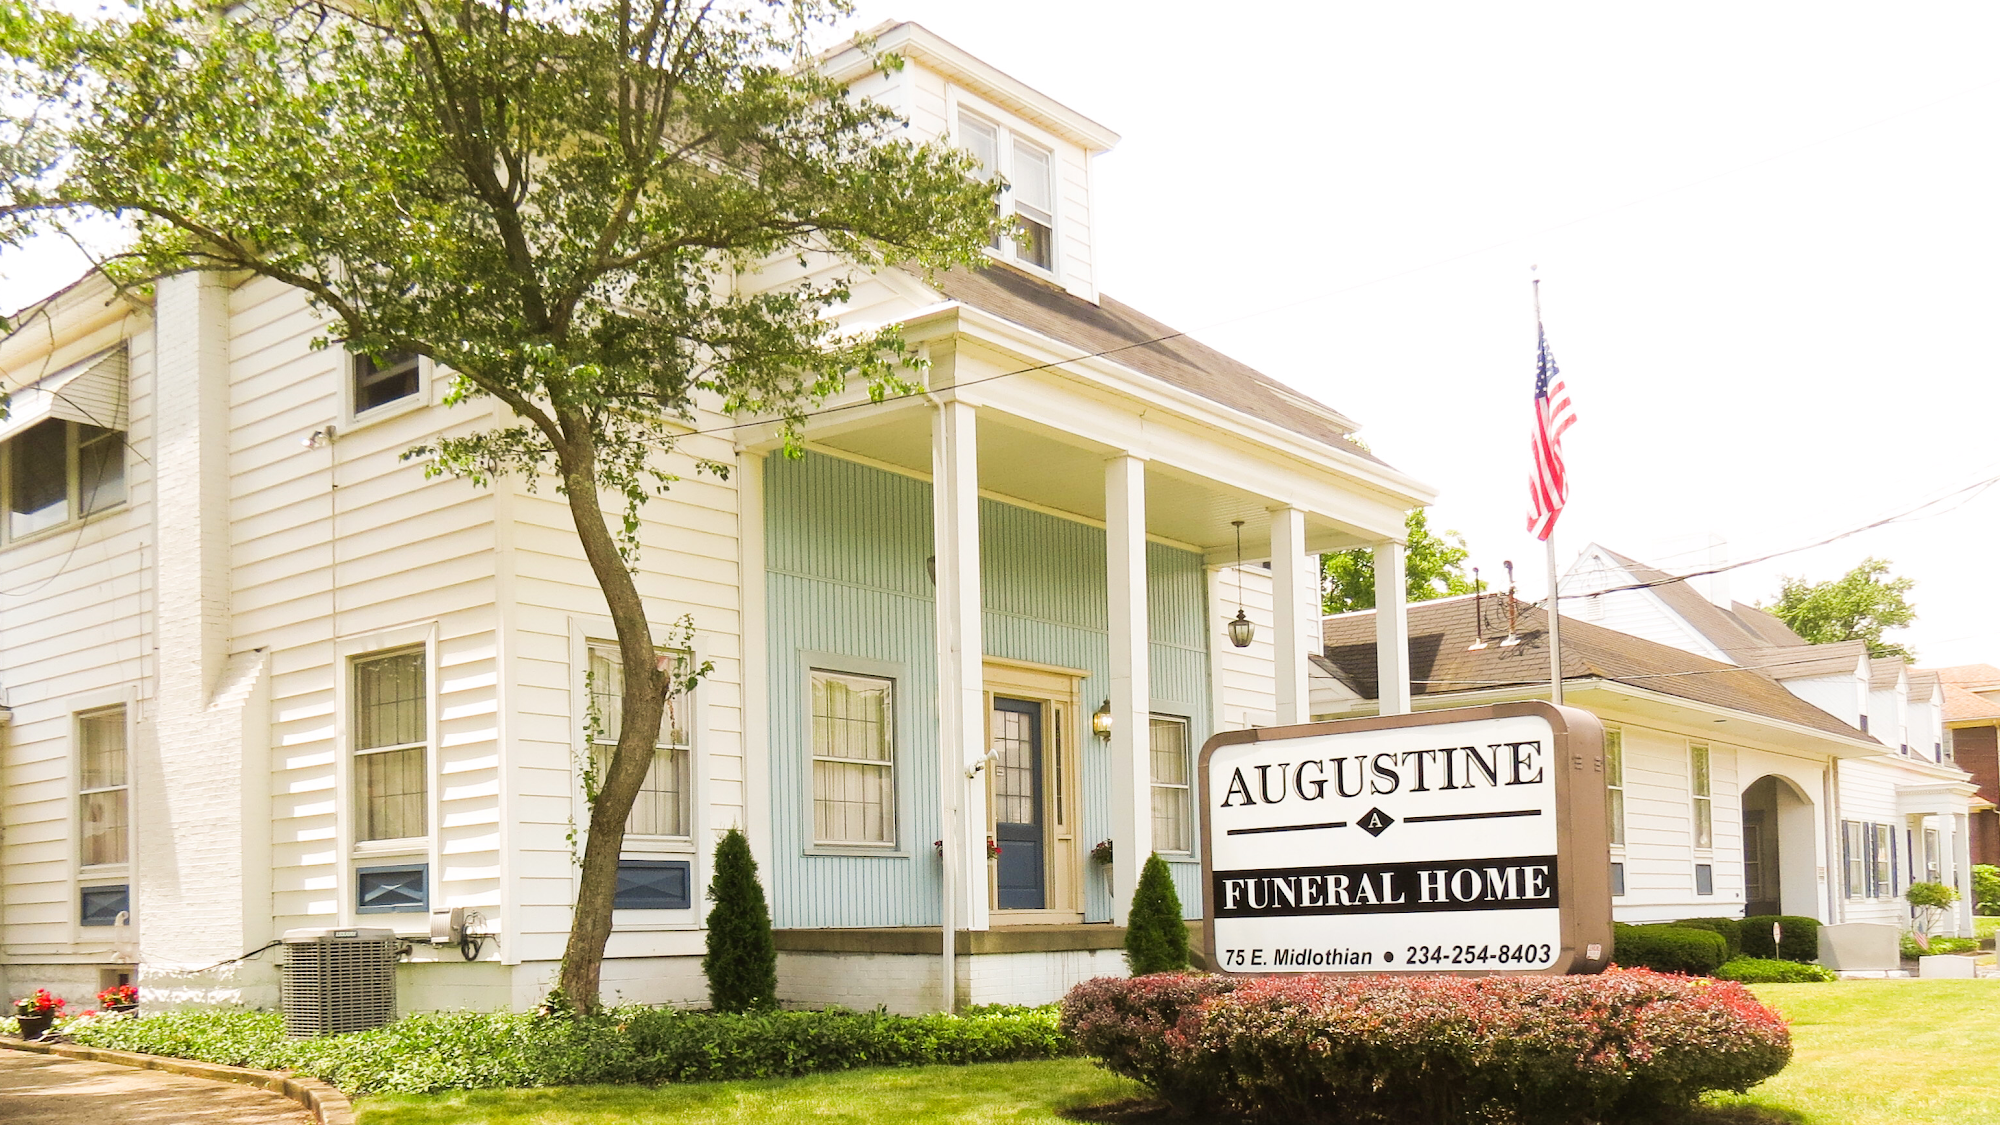 Augustine Funeral Home